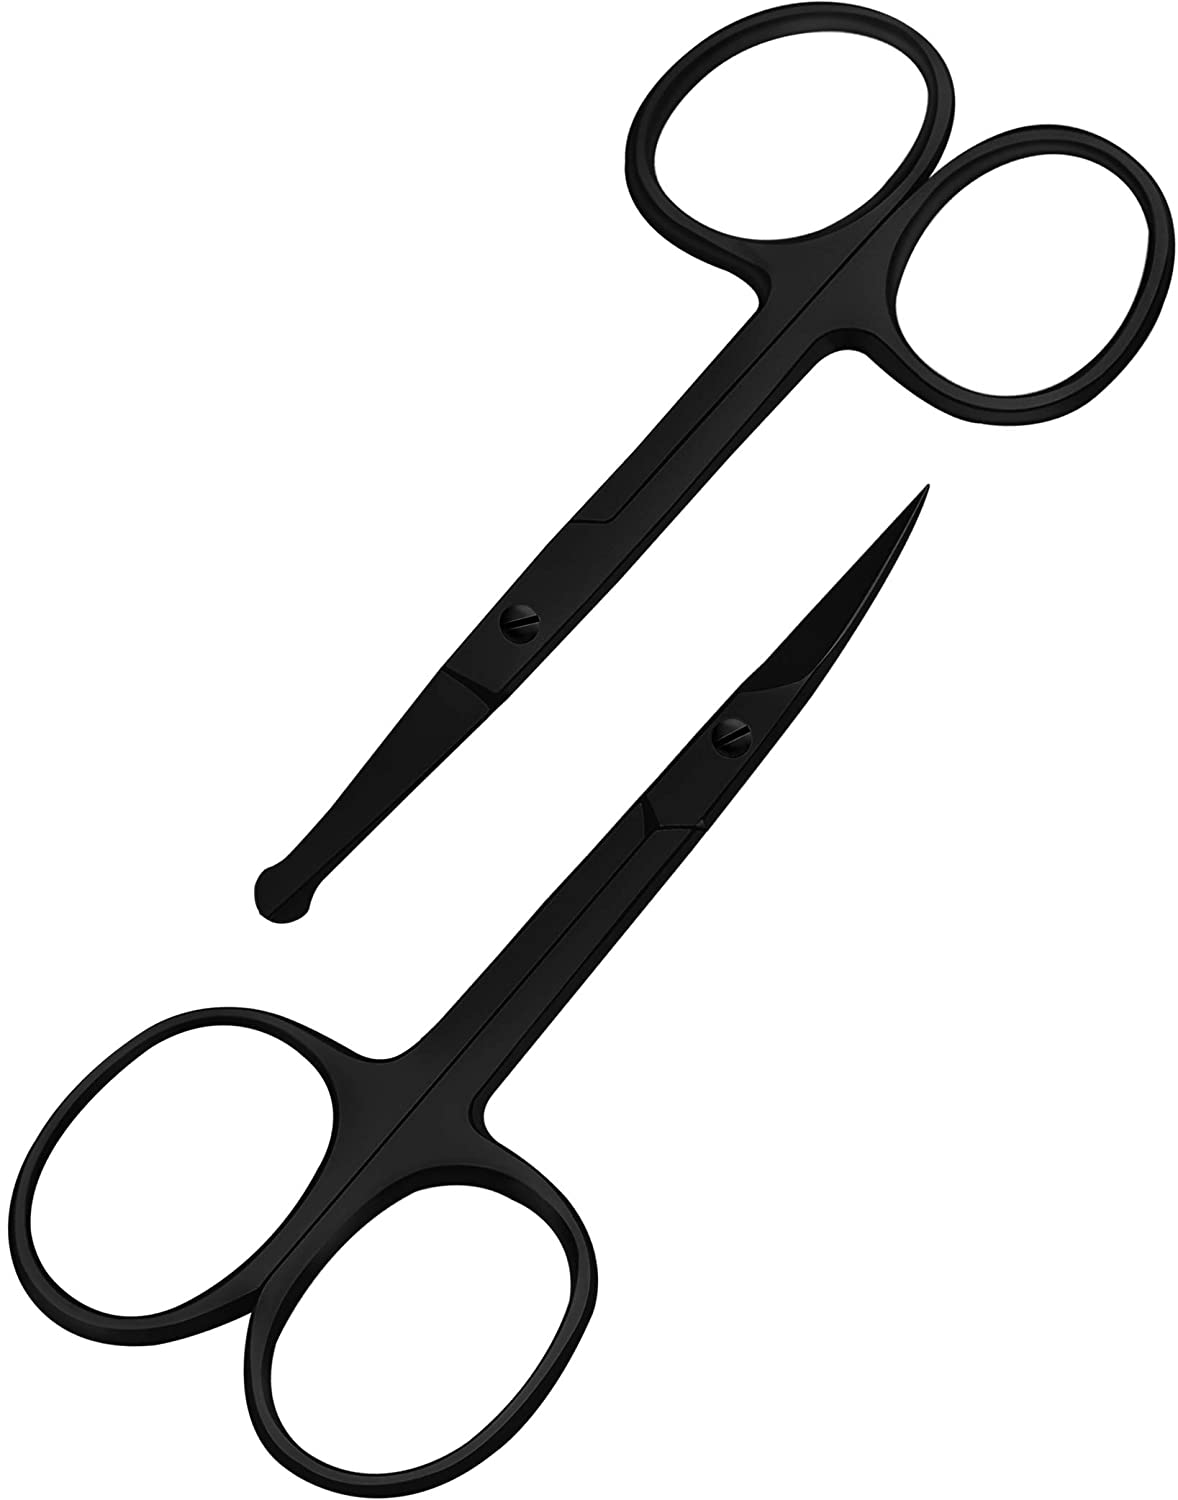 Stainless Steel Scissors/Shears by Utopia Care – Utopia Deals